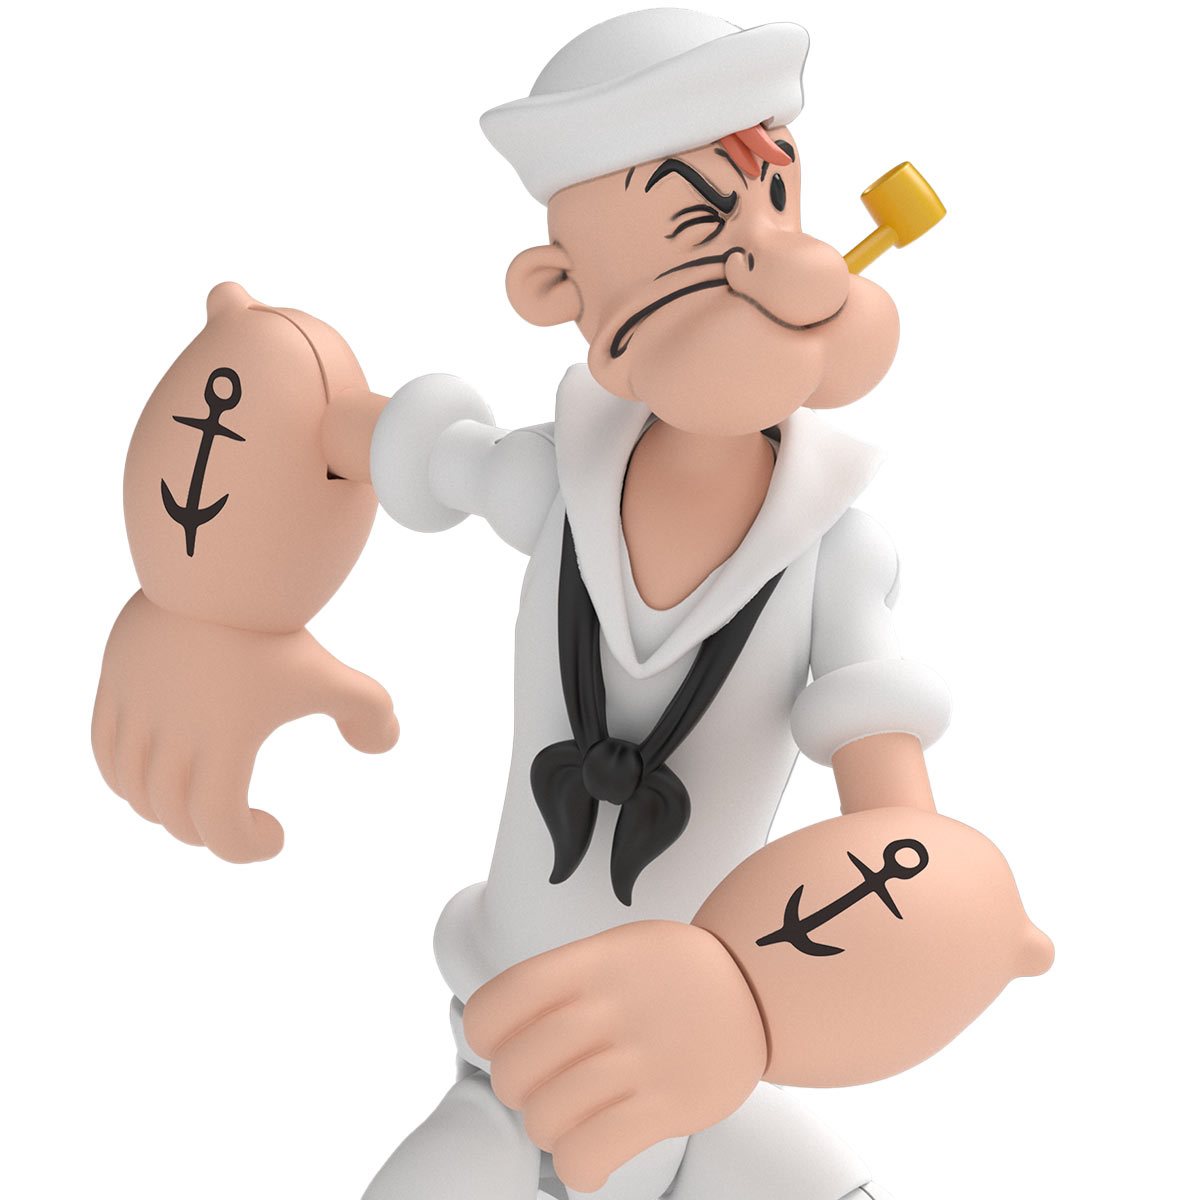 1:12　White　Classics　Popeye　Sailor　Action　Figure　Suit　Wave　Popeye　Scale